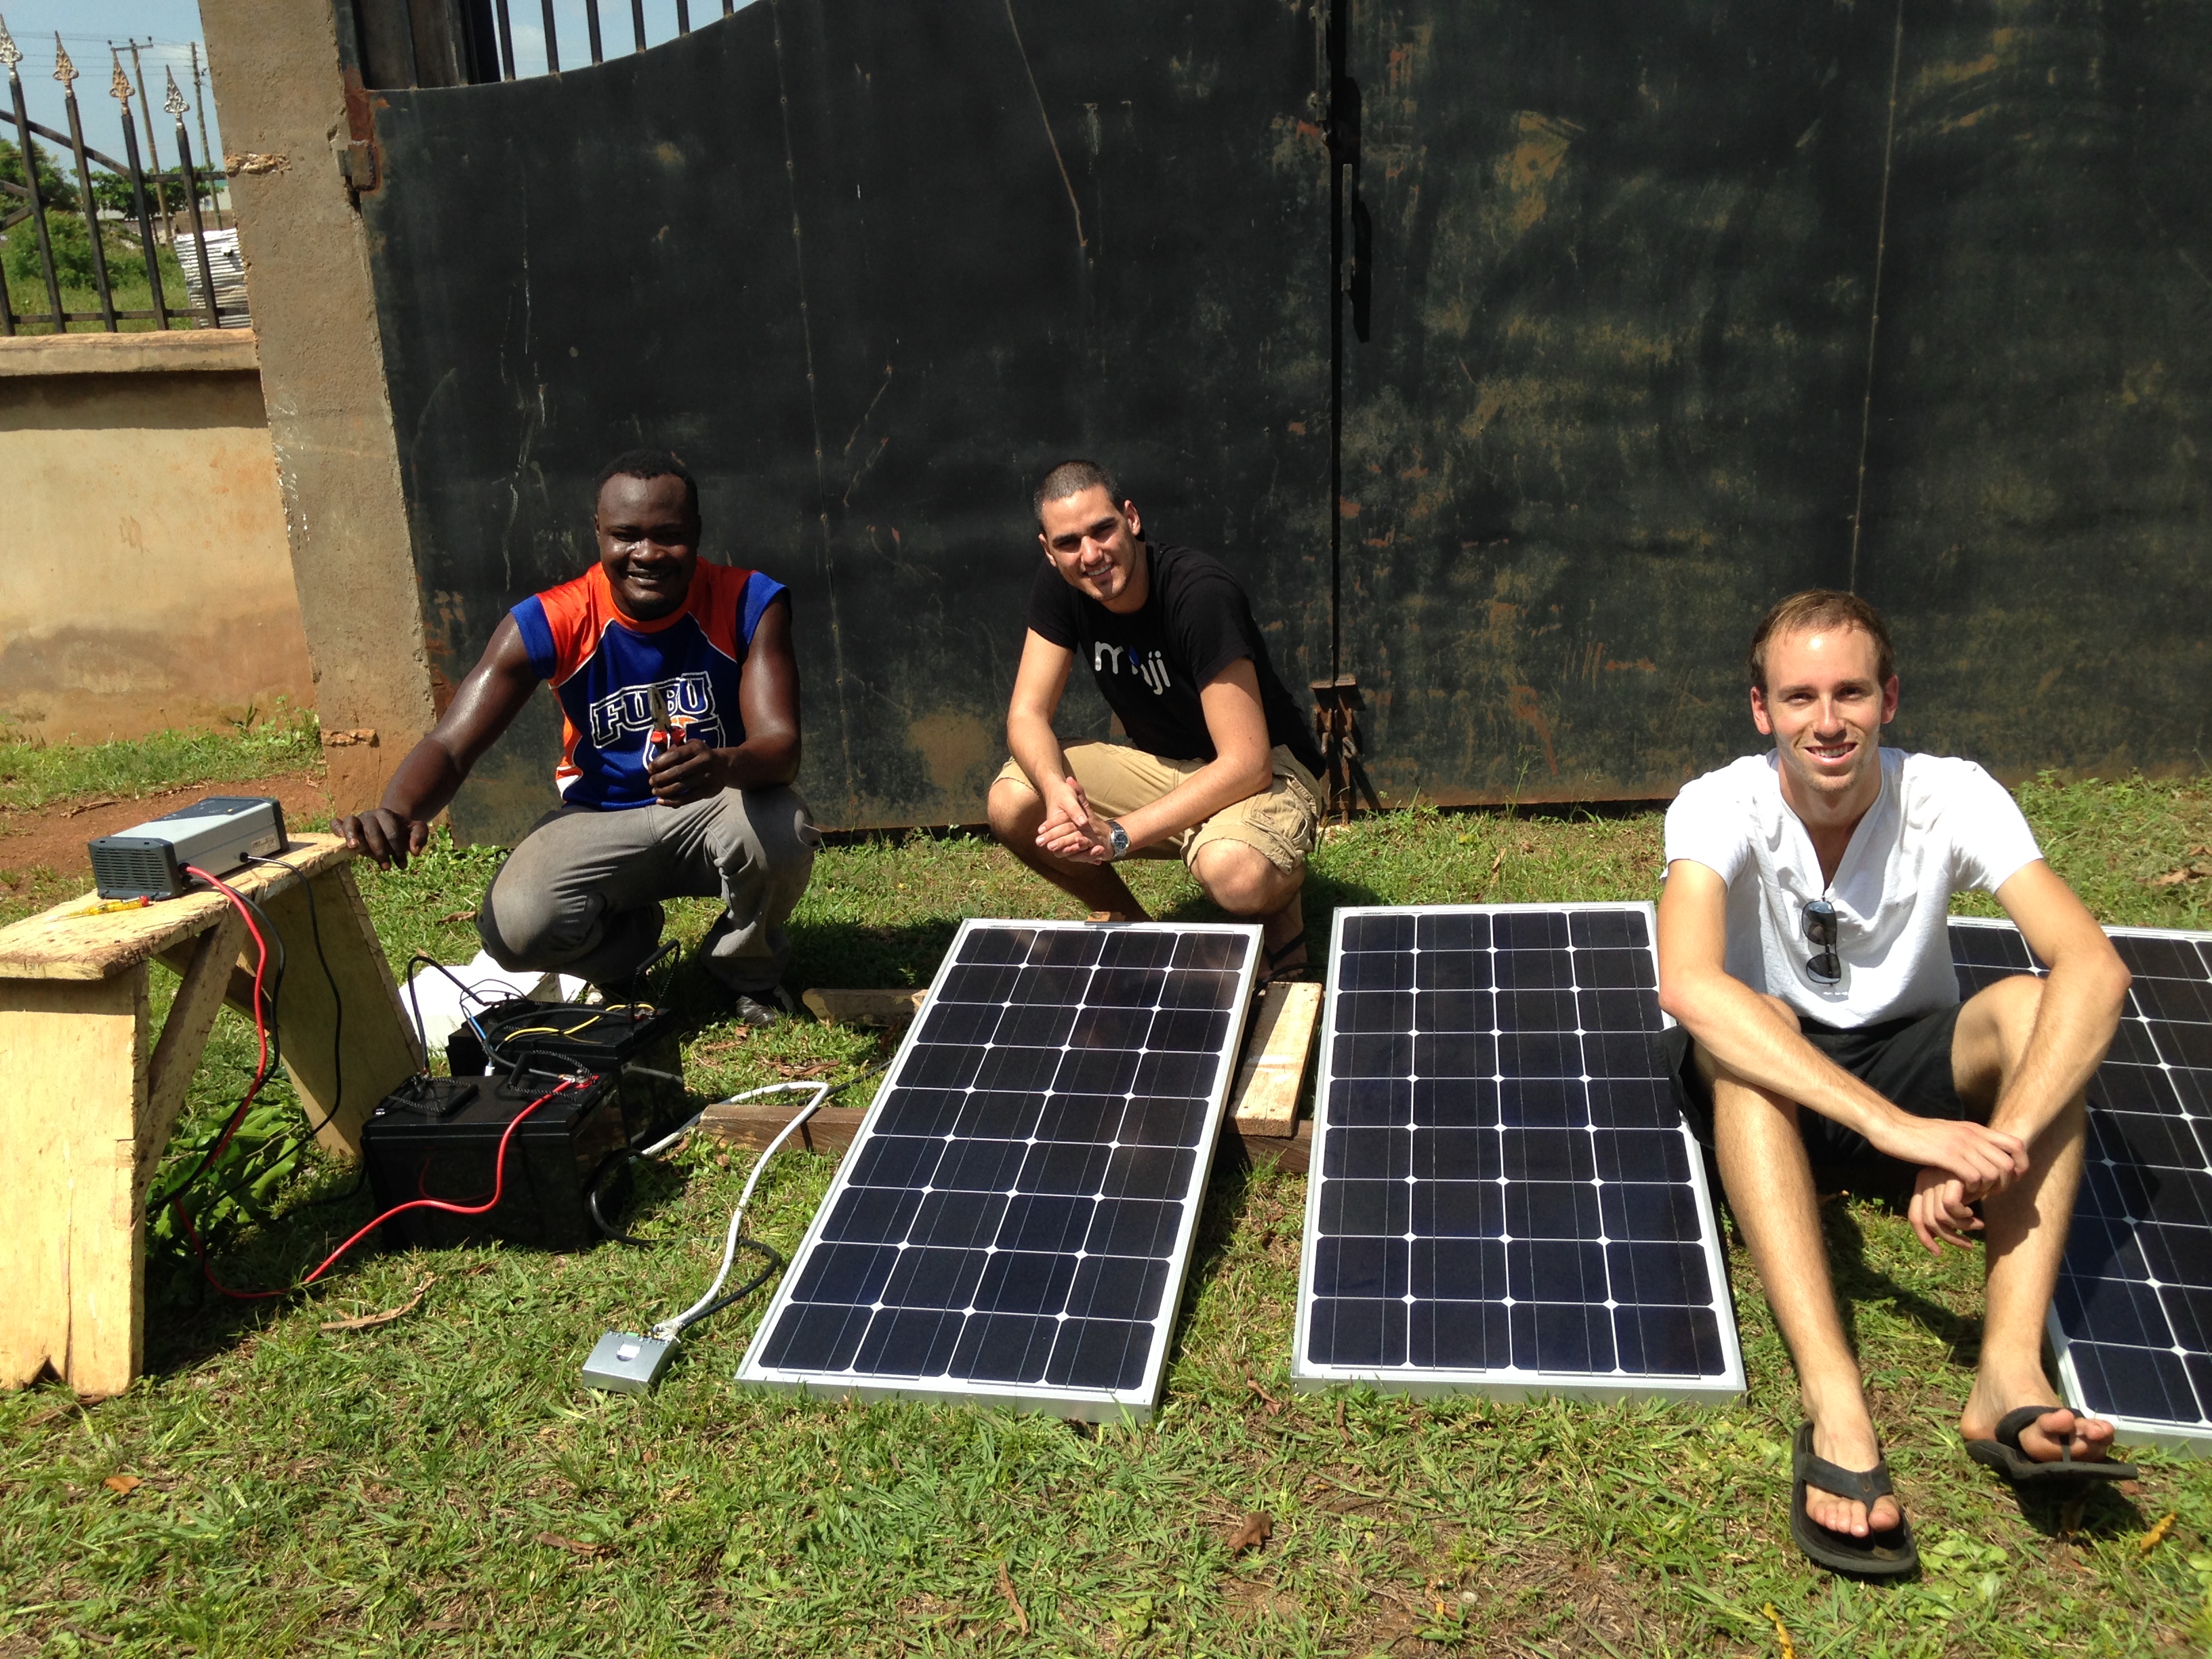 Shak, Mark, and Ben, checking out the fully-assembled Solar Panel system.